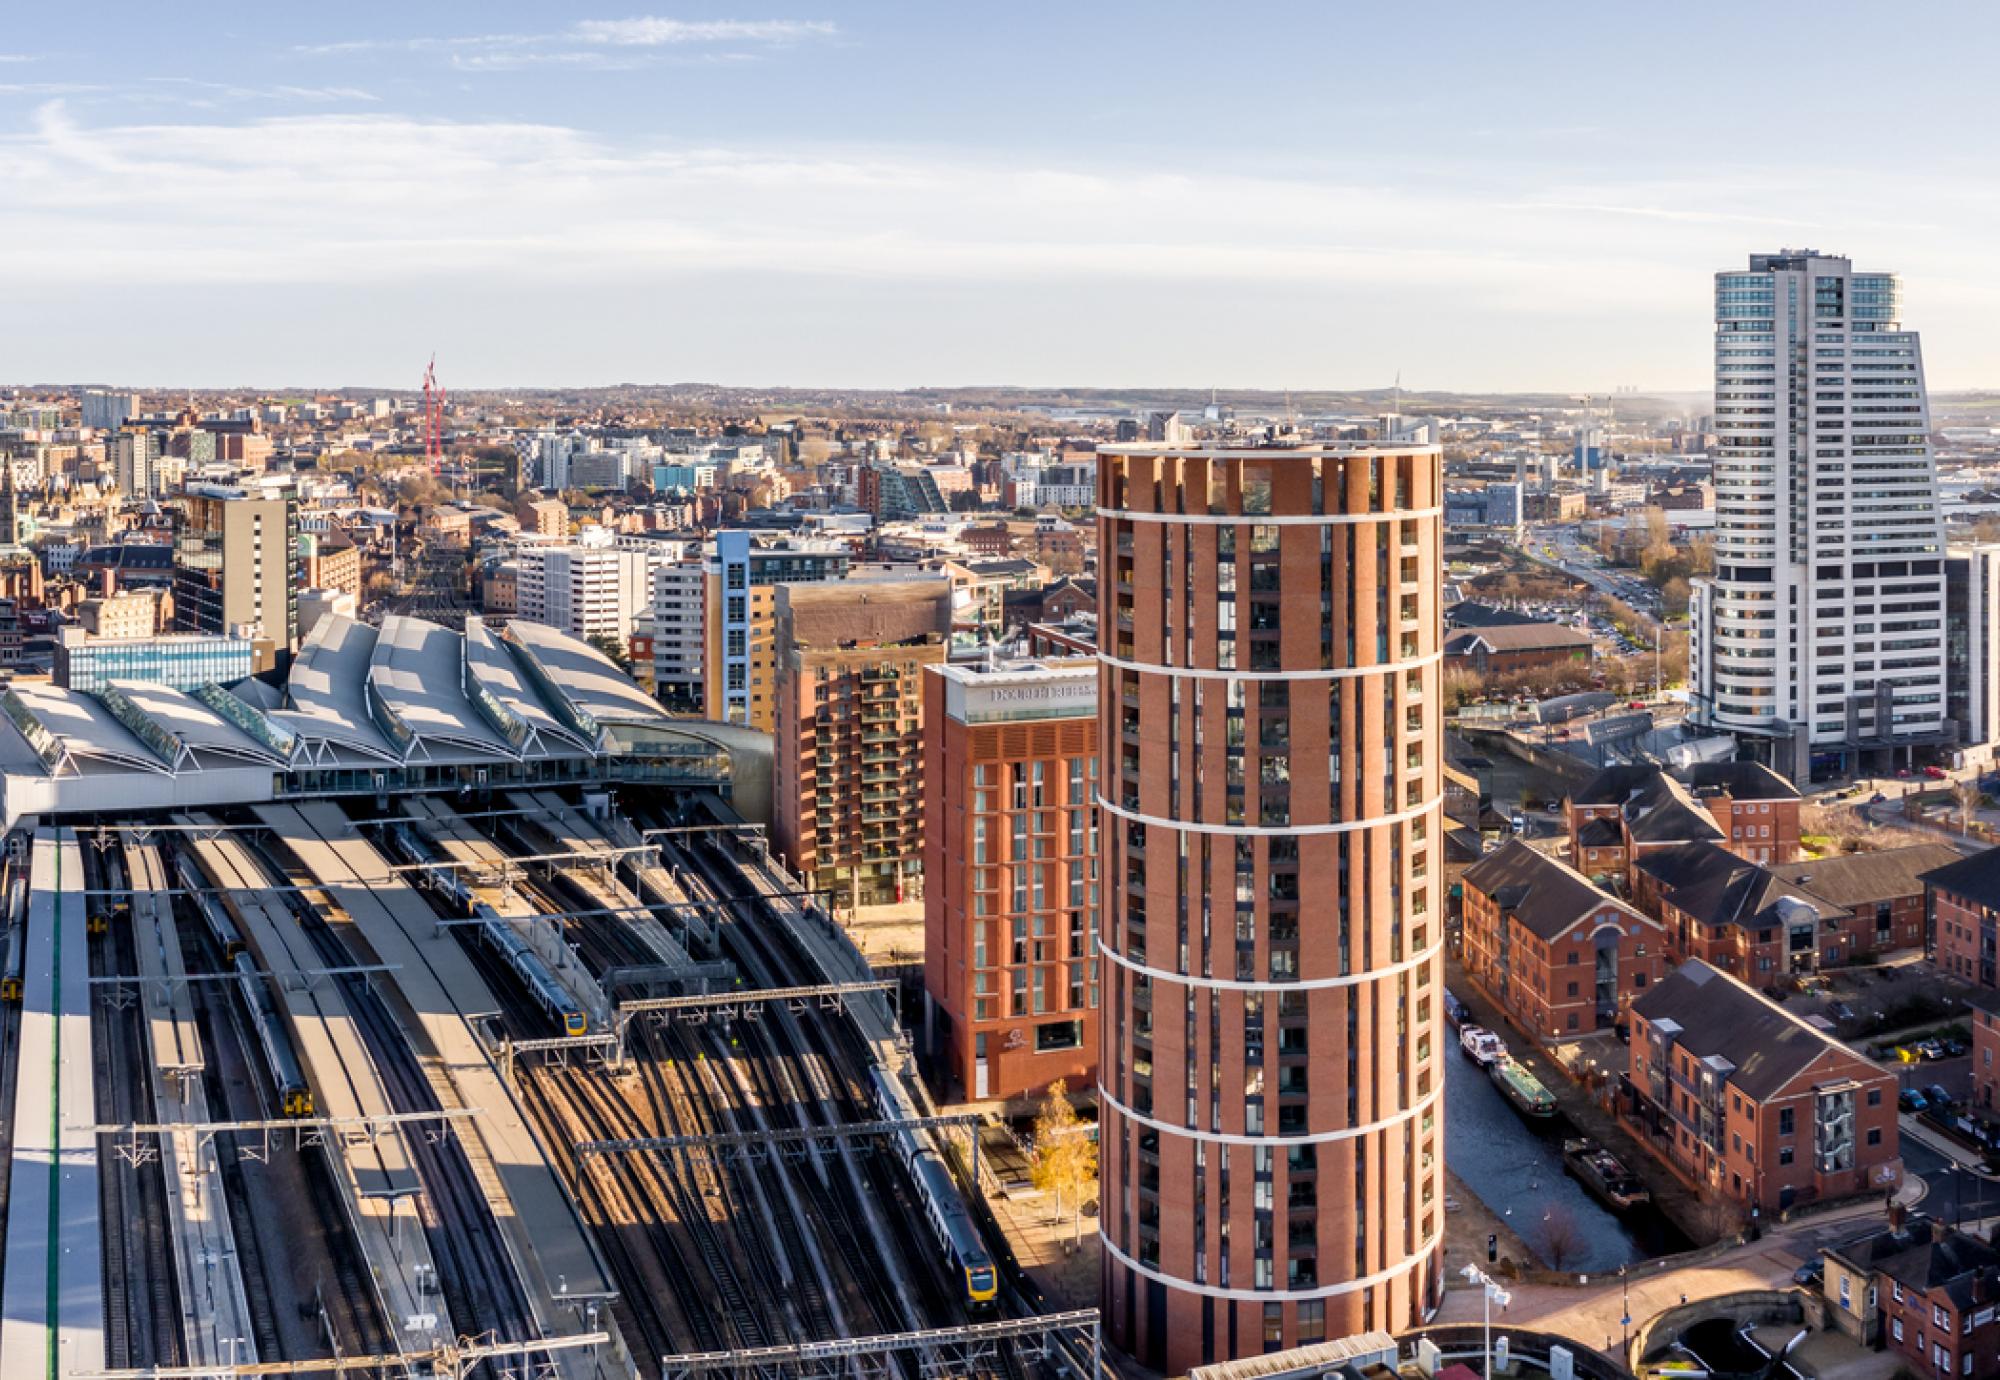 Aerial view of Leeds city railway station